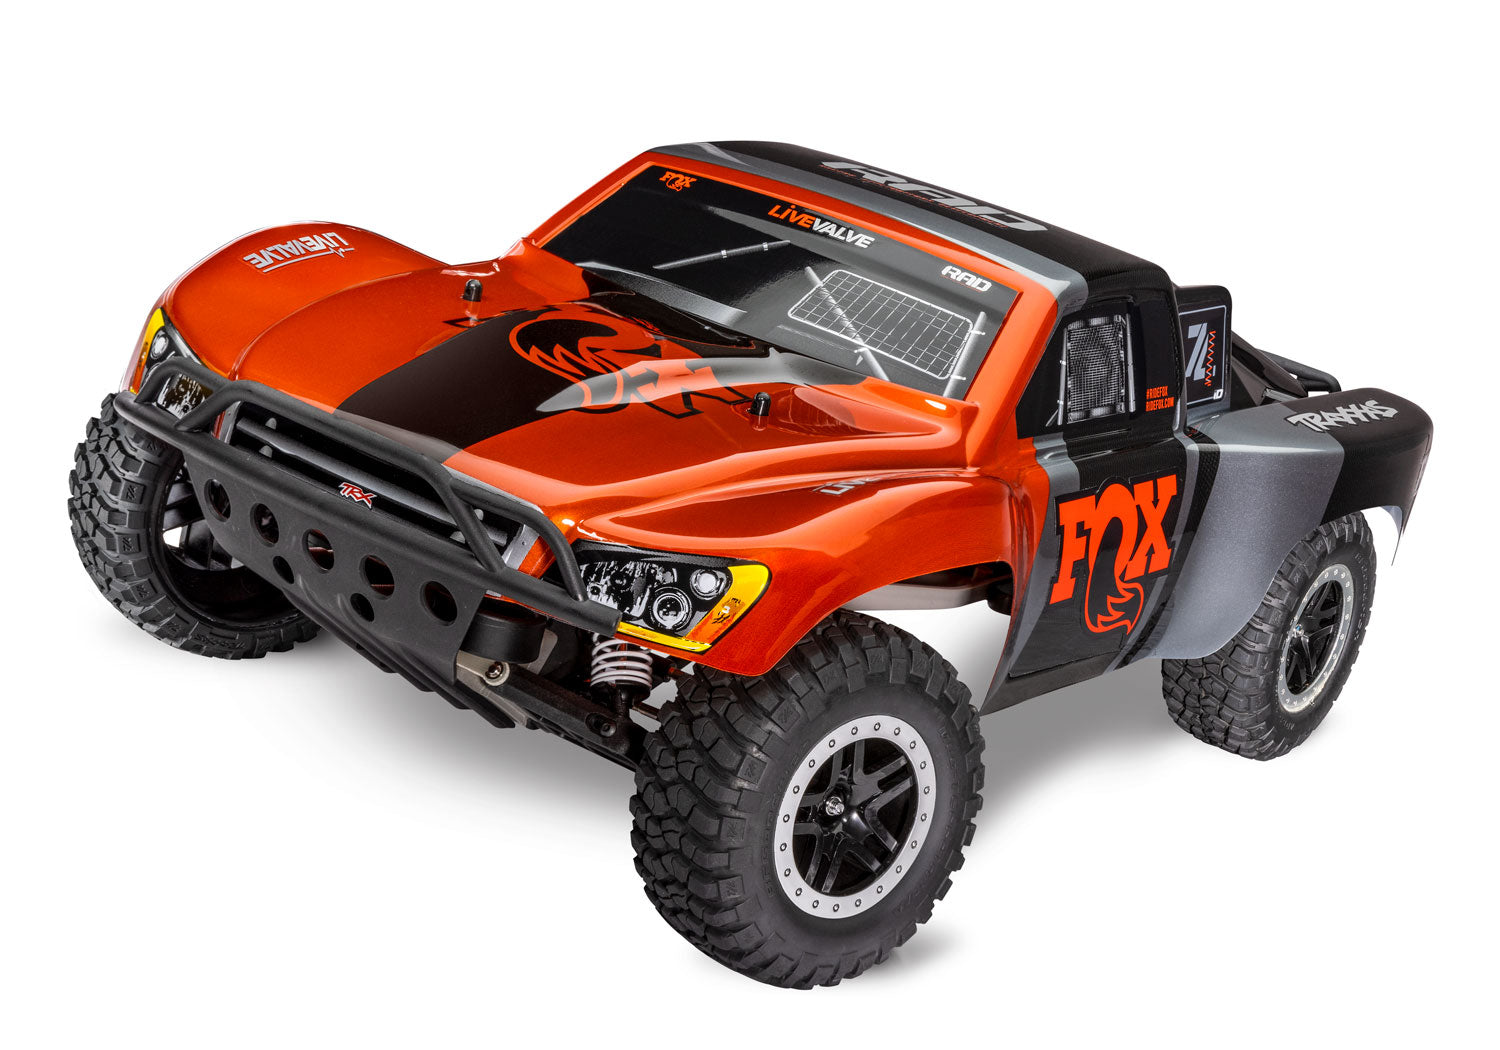 TRAXXAS 58076-74 Slash VXL 1/10 scale 2WD short course truck. RTR, with Traxxas Stability Management TSM®, TQi™ 2.4GHz radio system, Velineon® brushless power system, Magnum 272R™ transmission, and painted body.